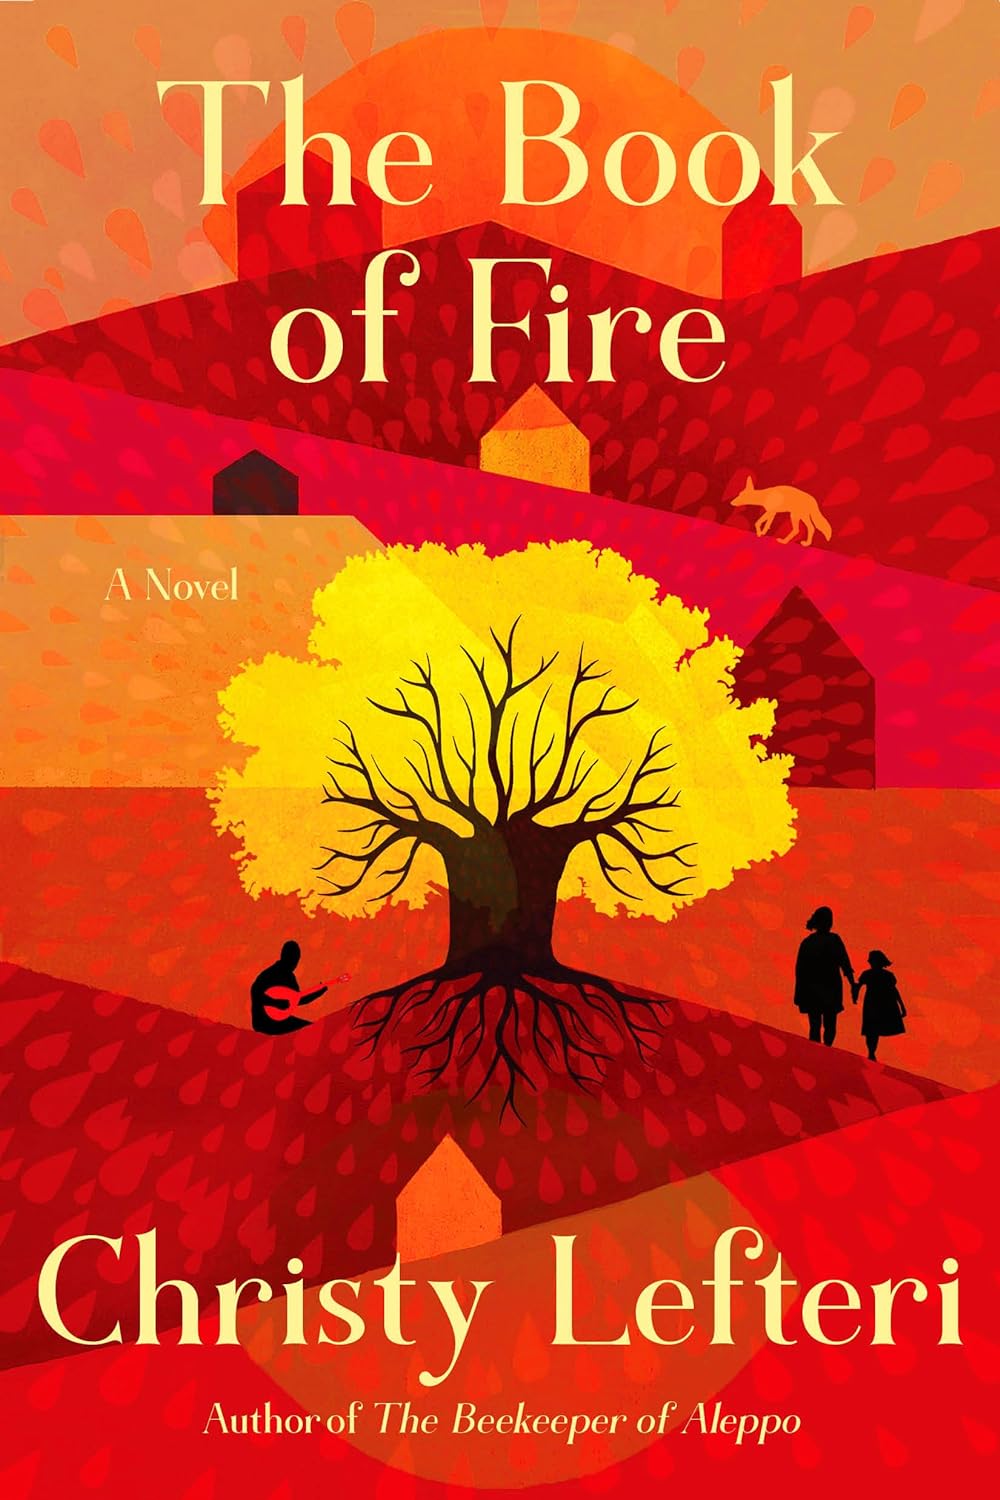 Image for "The Book of Fire"